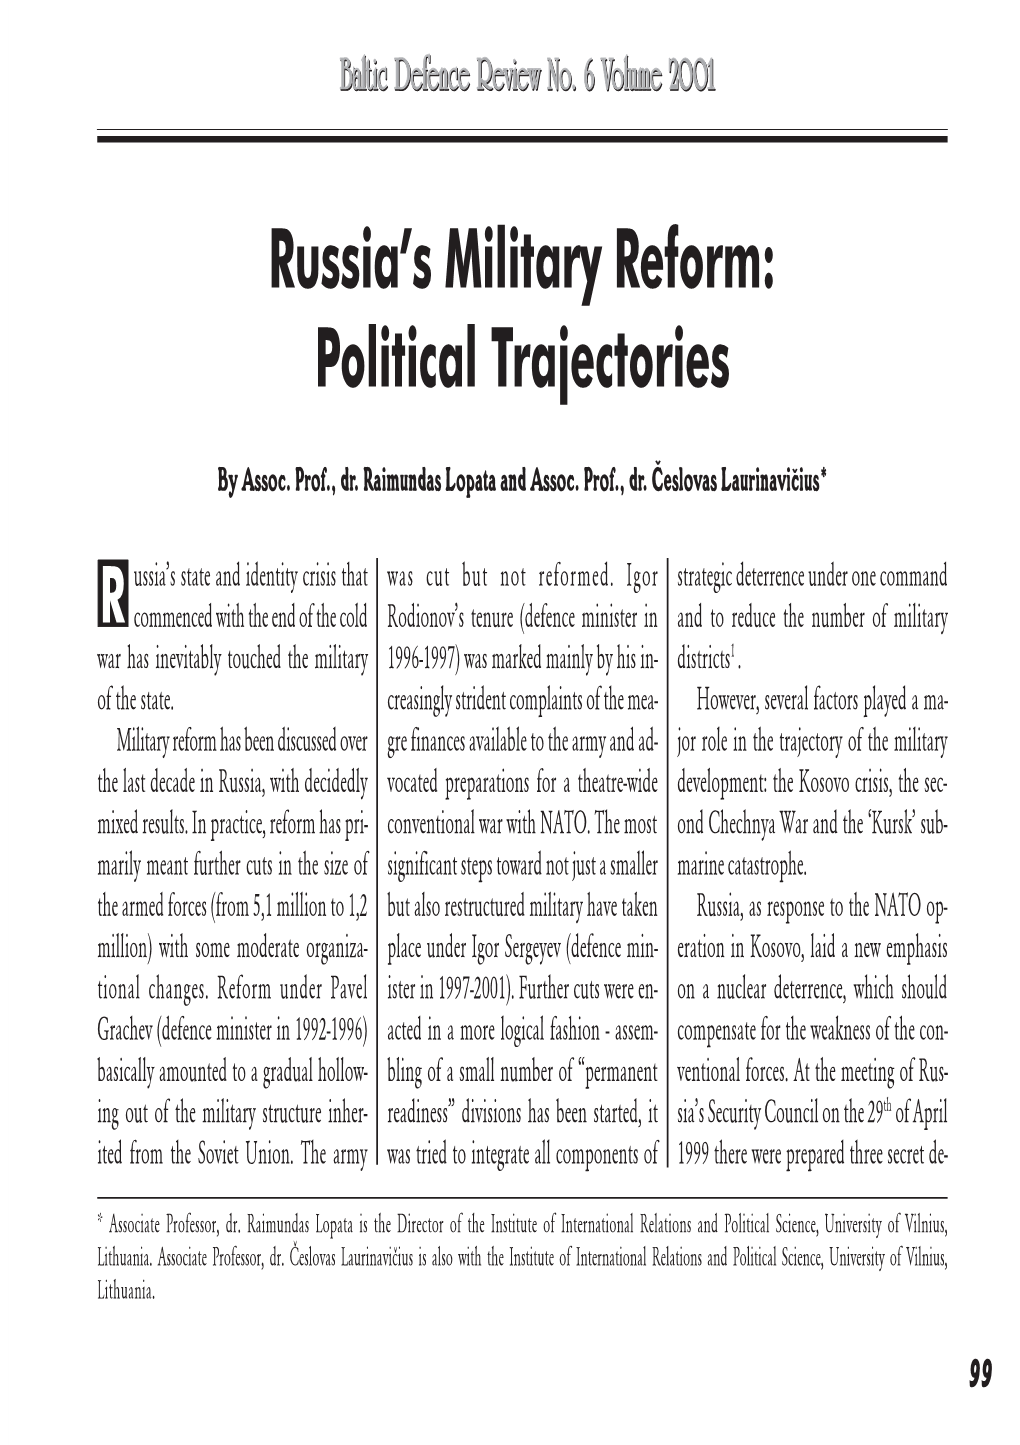 Russia's Military Reform: Political Trajectories